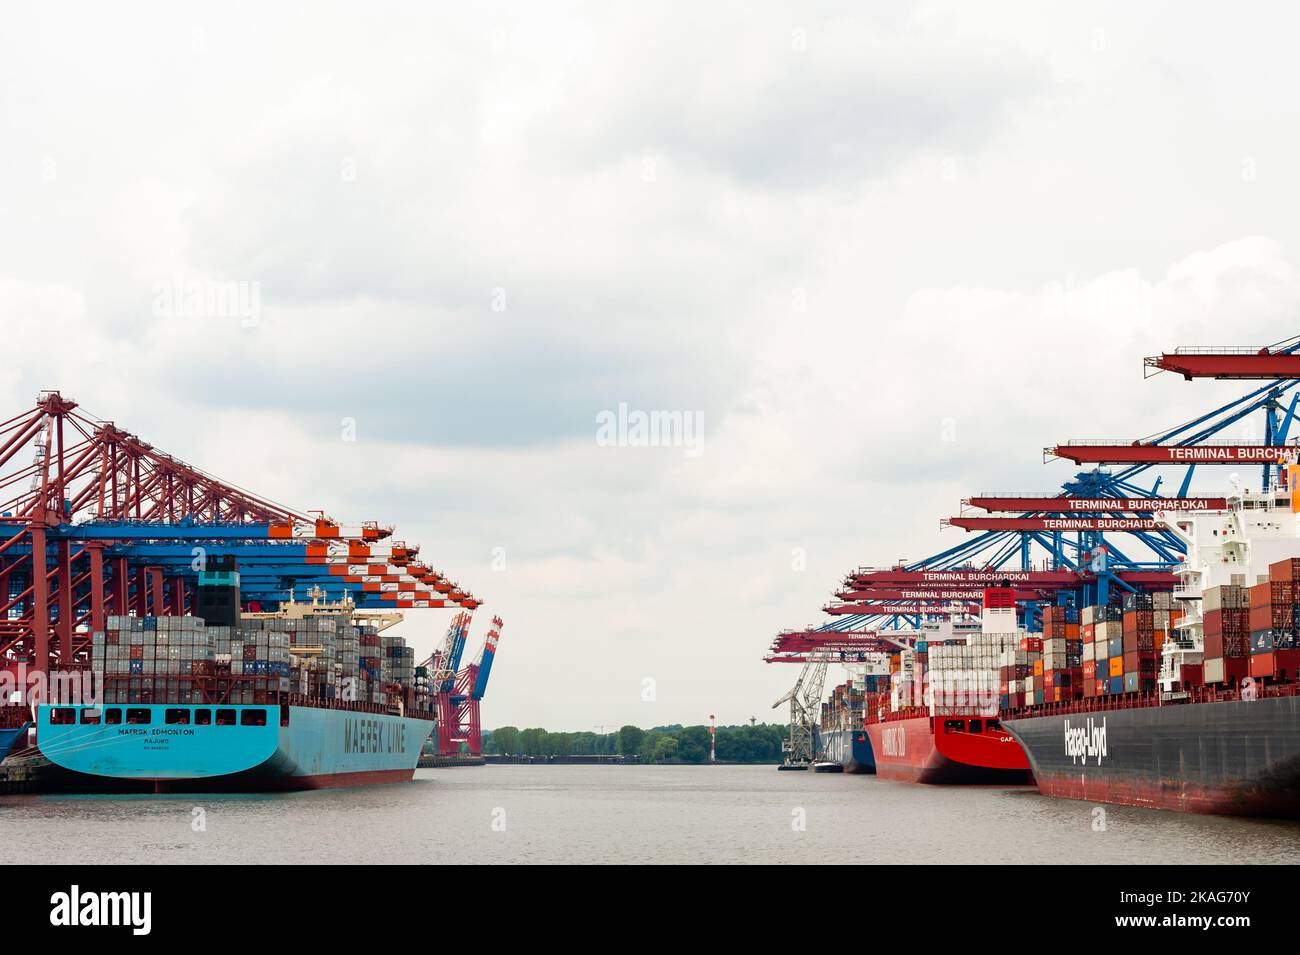 Hamburg. Germany - July 07, 2014: Container vessels from different shipping lines at Container Terminals Burchardkai and Eurogate in Hamburg. Stock Photo